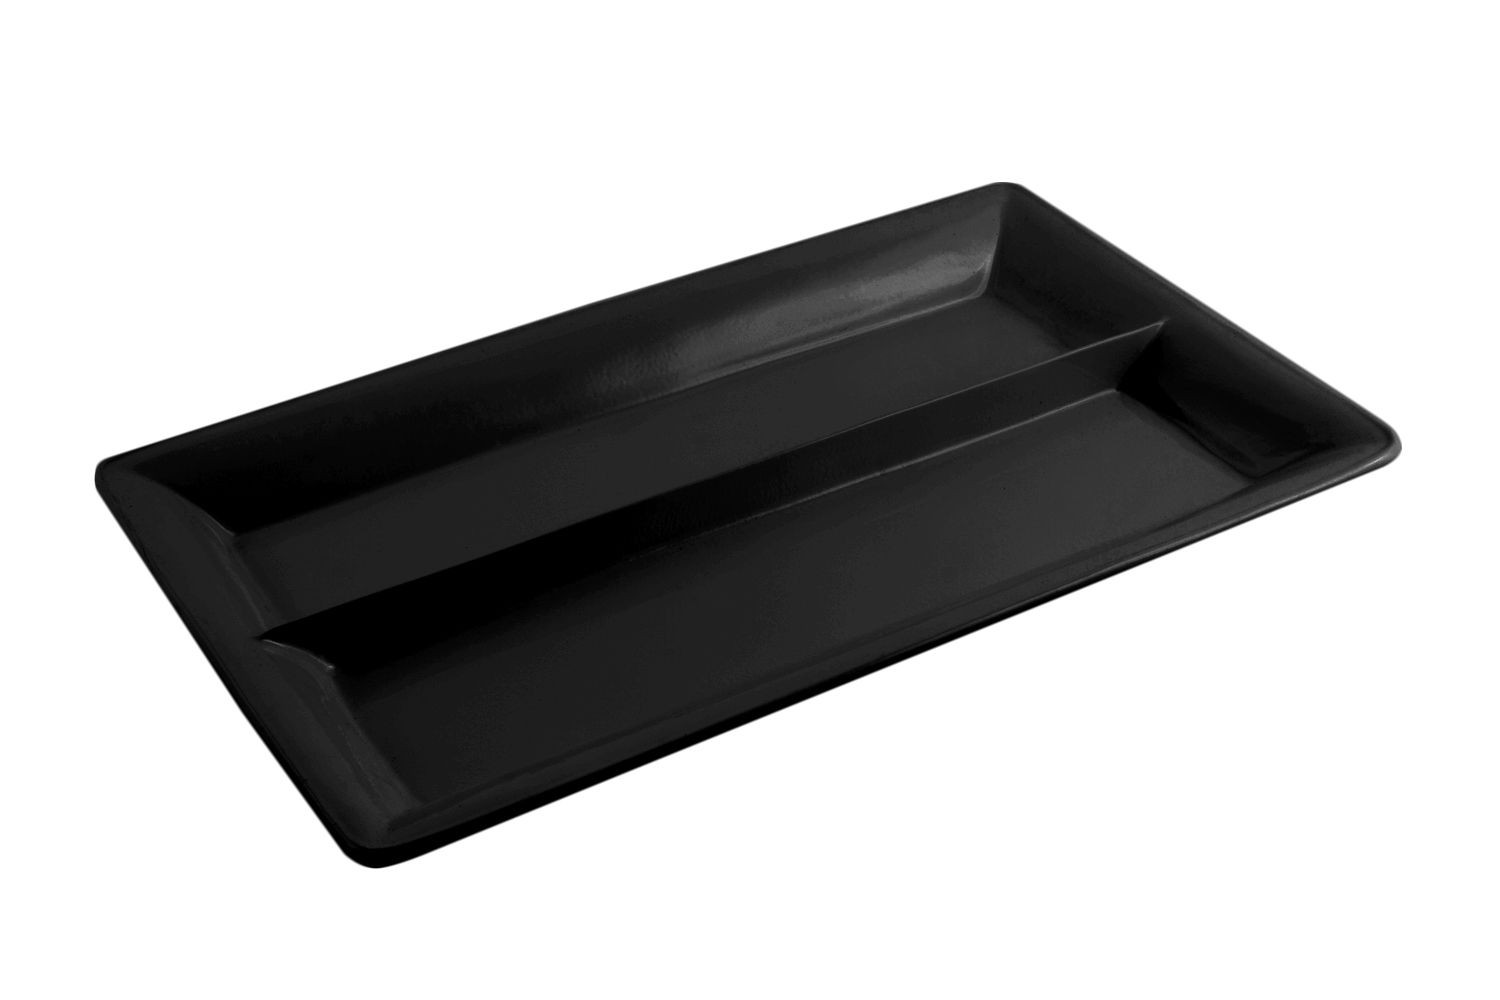 Bon Chef 5056DP Full-Size Divided Food / Display Pan, Pewter Glo 21 1/2" x 13"